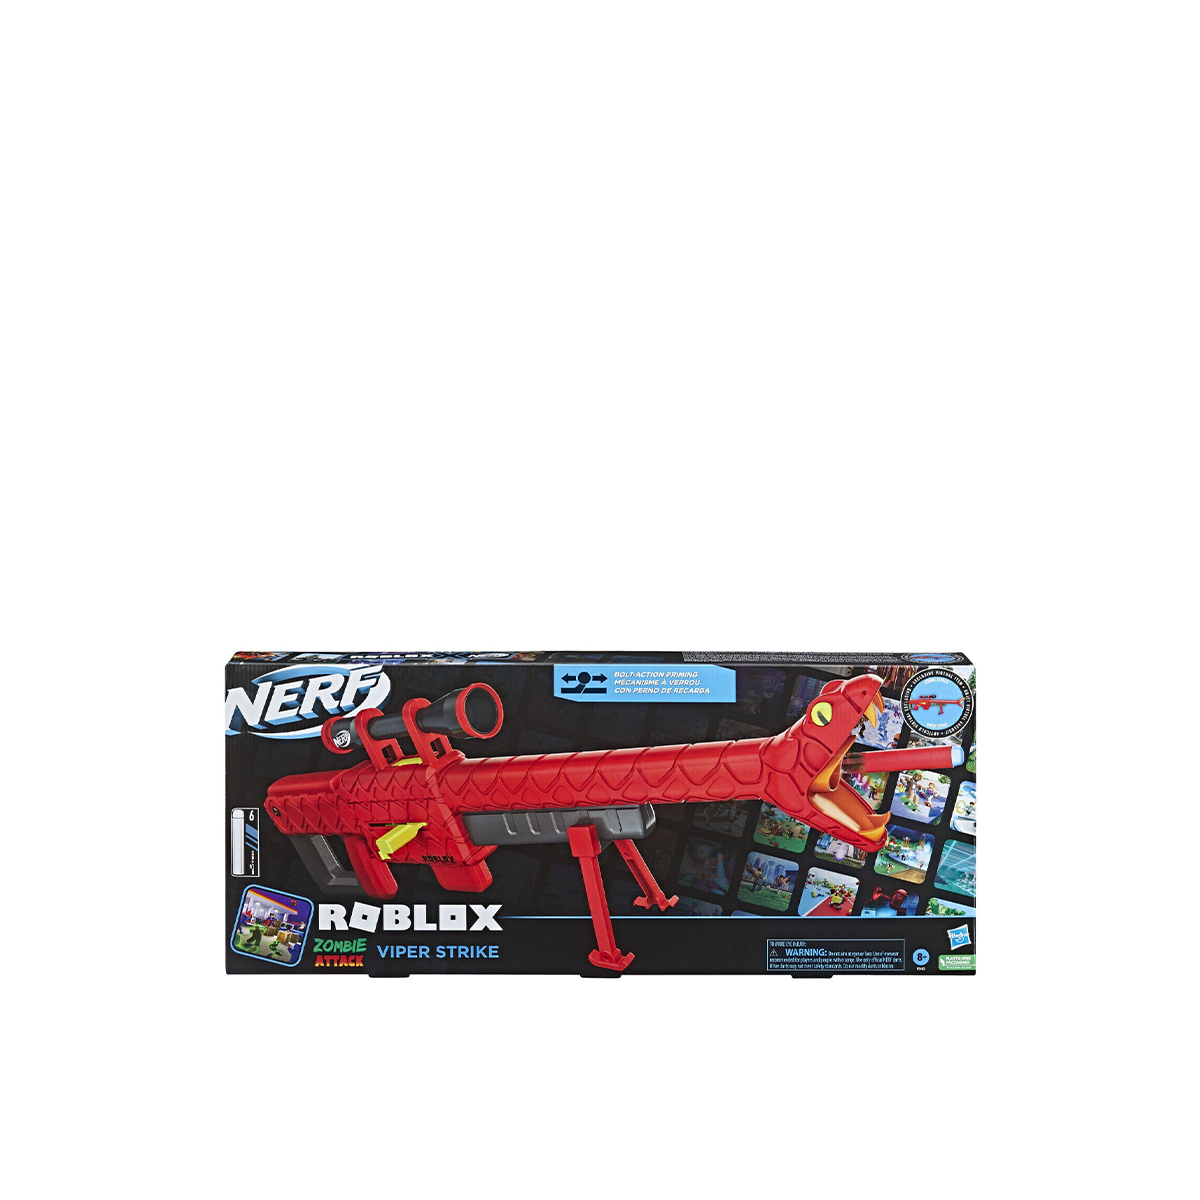 Ner Roblox Zombie Attack Viper Strike by NERF Online, THE ICONIC